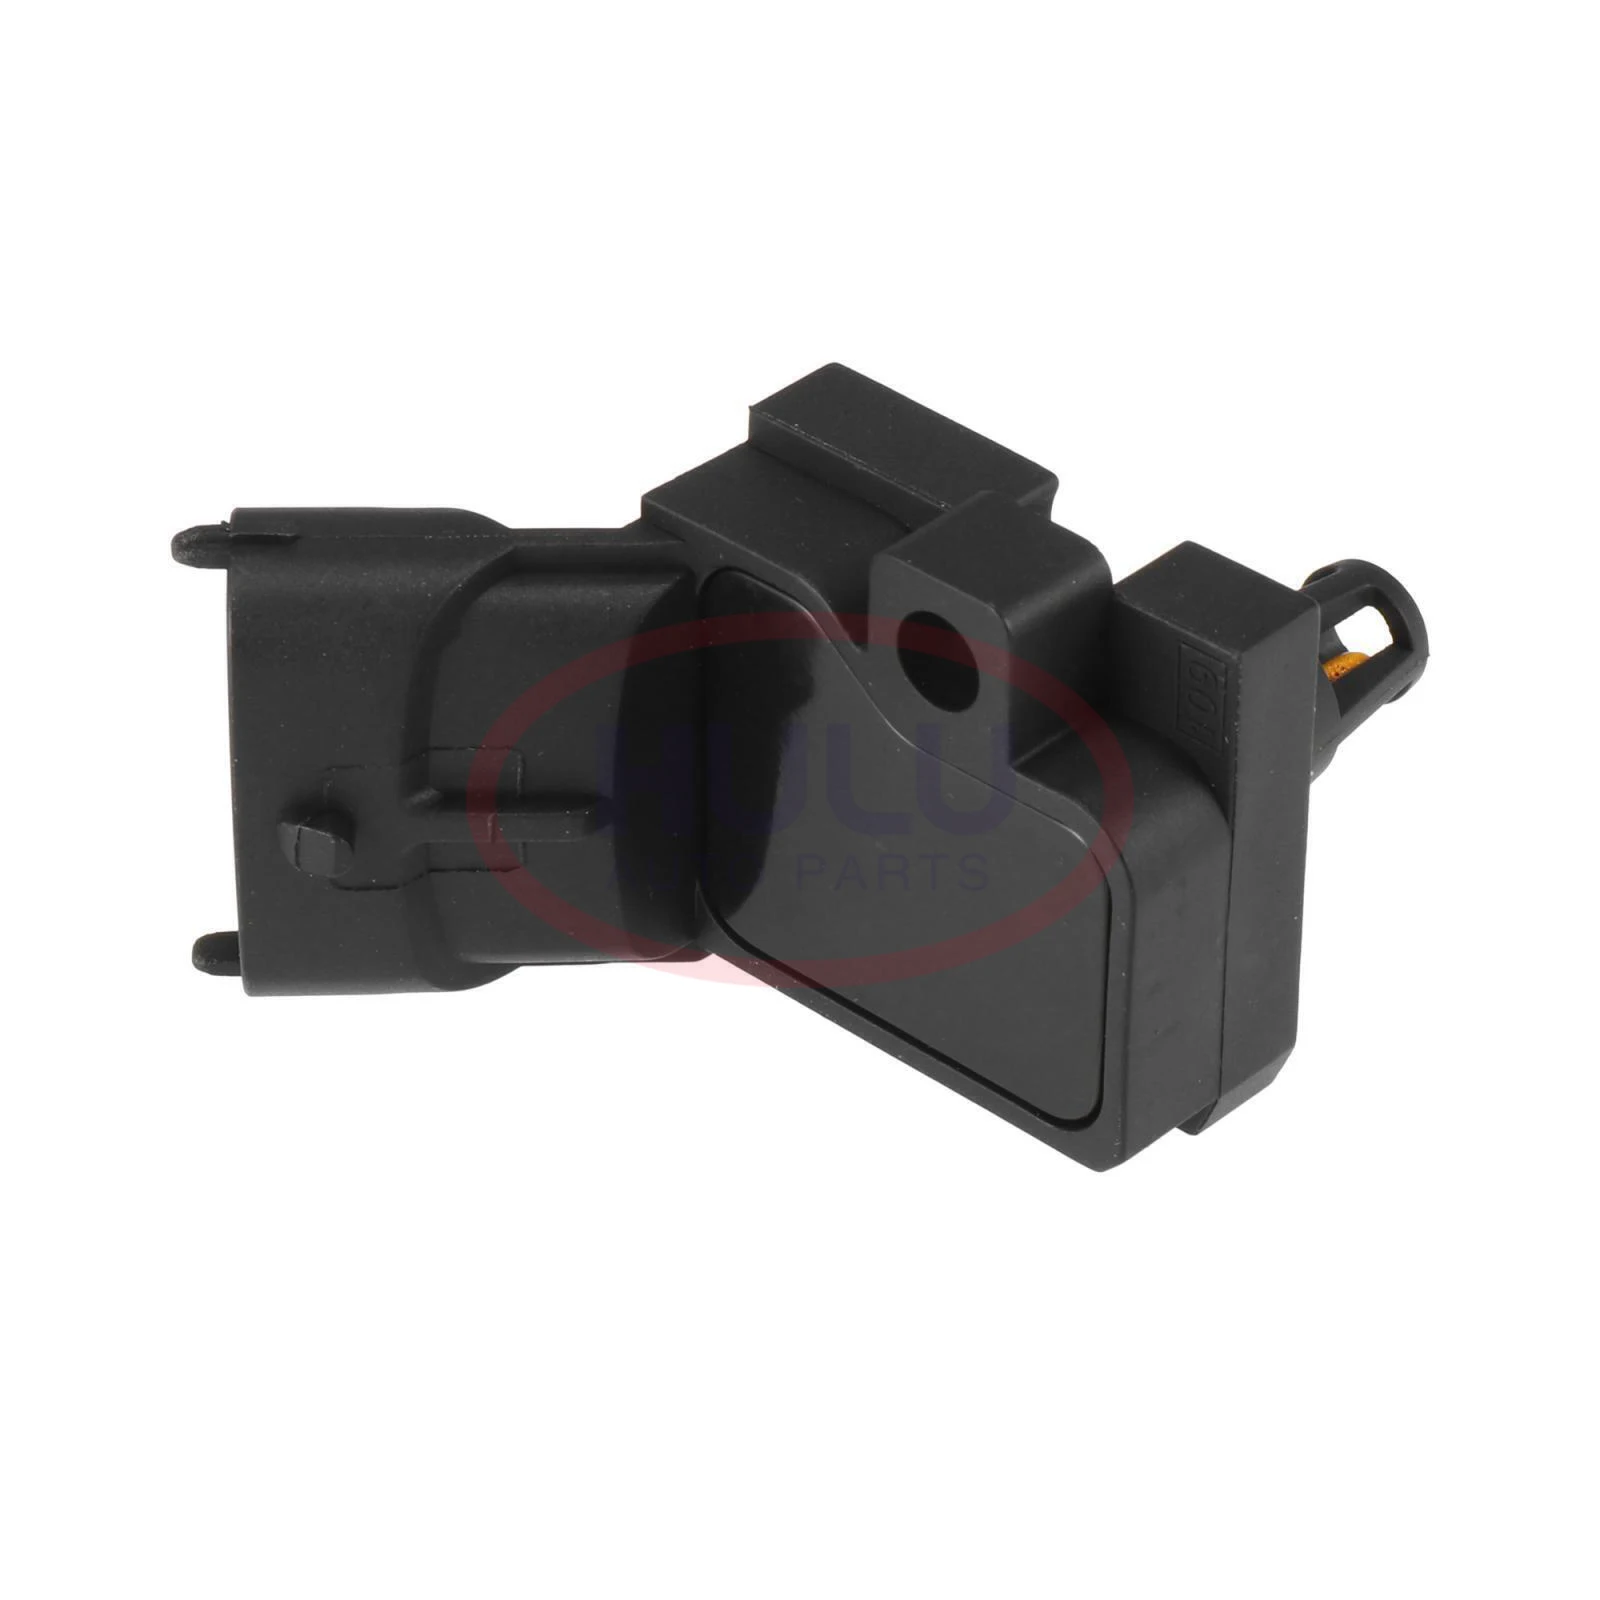 

Air Manifold Intake Turbo Pressure Sensor For Land Rover Volvo V70 Xc60 2.4 2.0 D3 D4 D5 T5 1689133 Automobile parts 0261230296